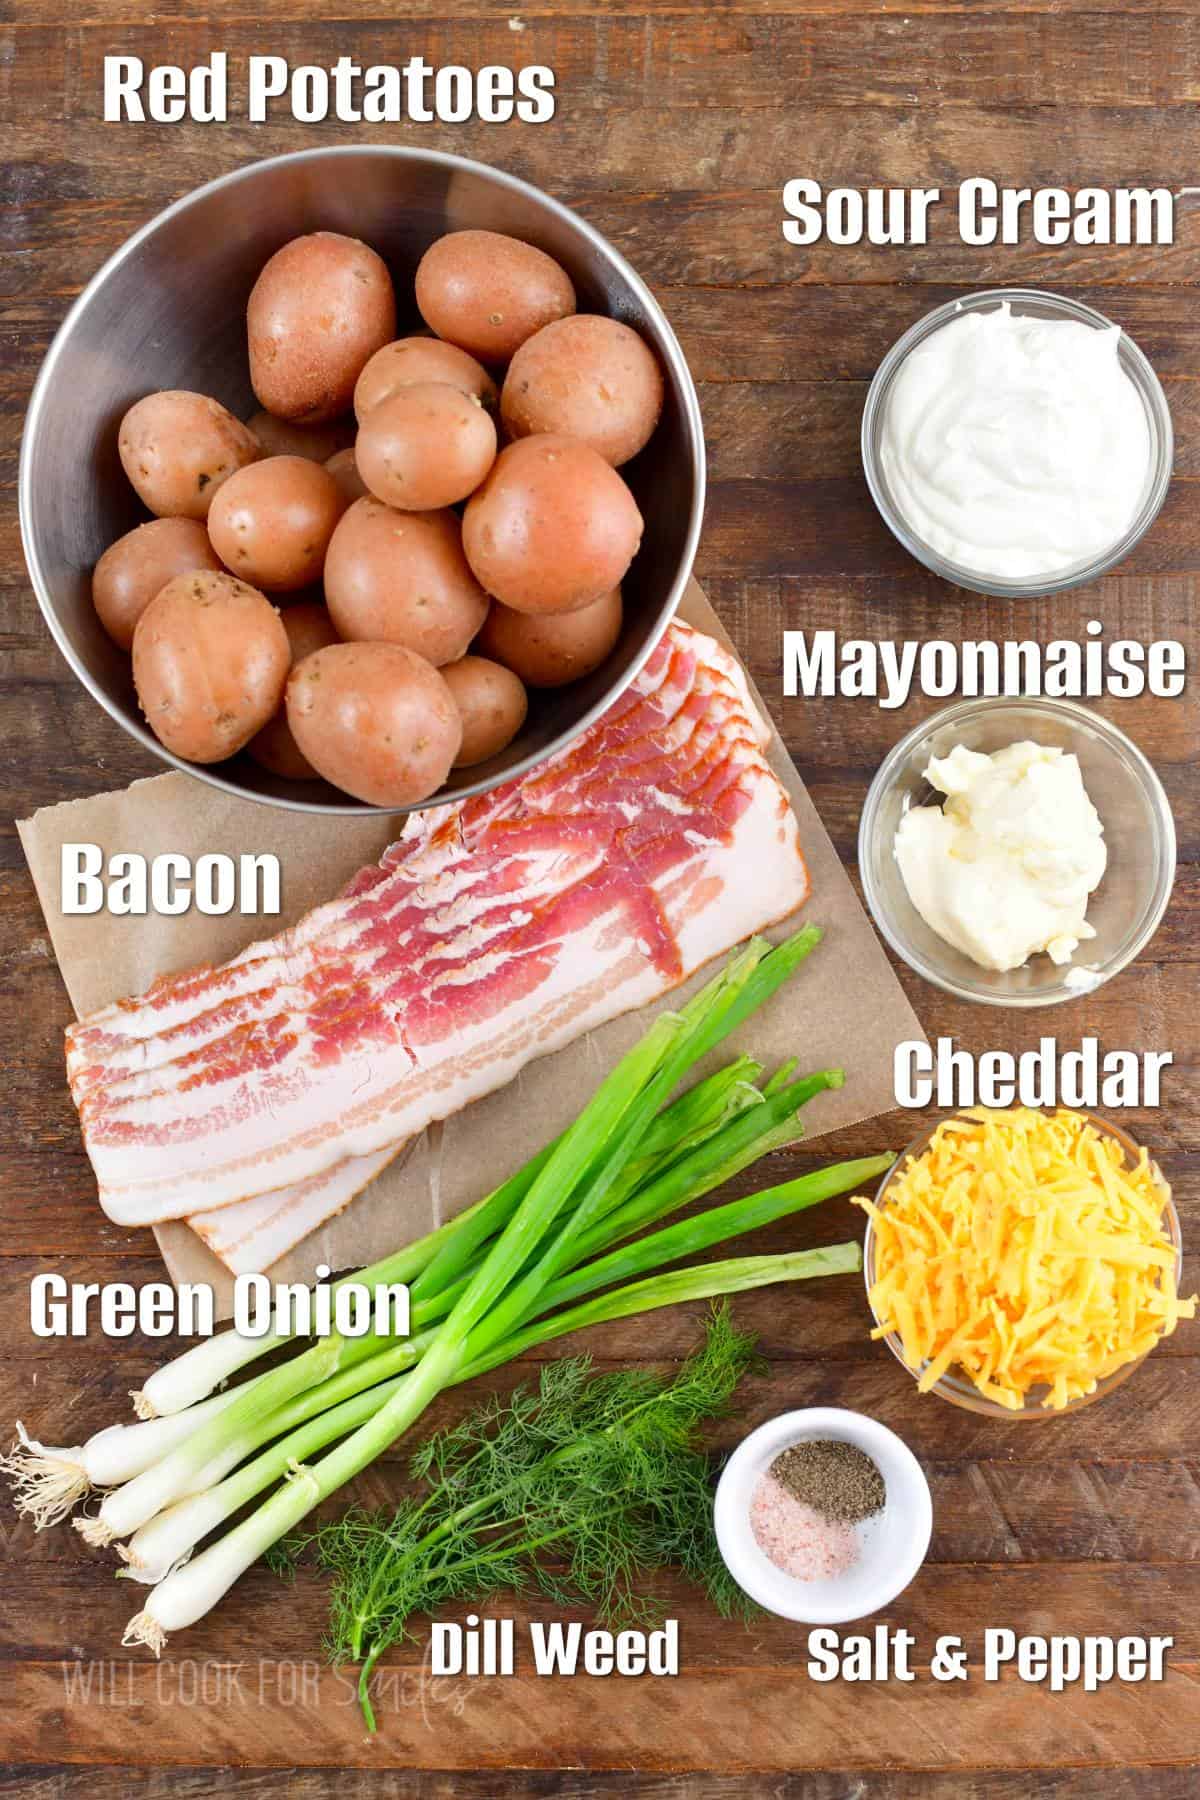 labeled ingredients to make loaded baked potato salad in the board.